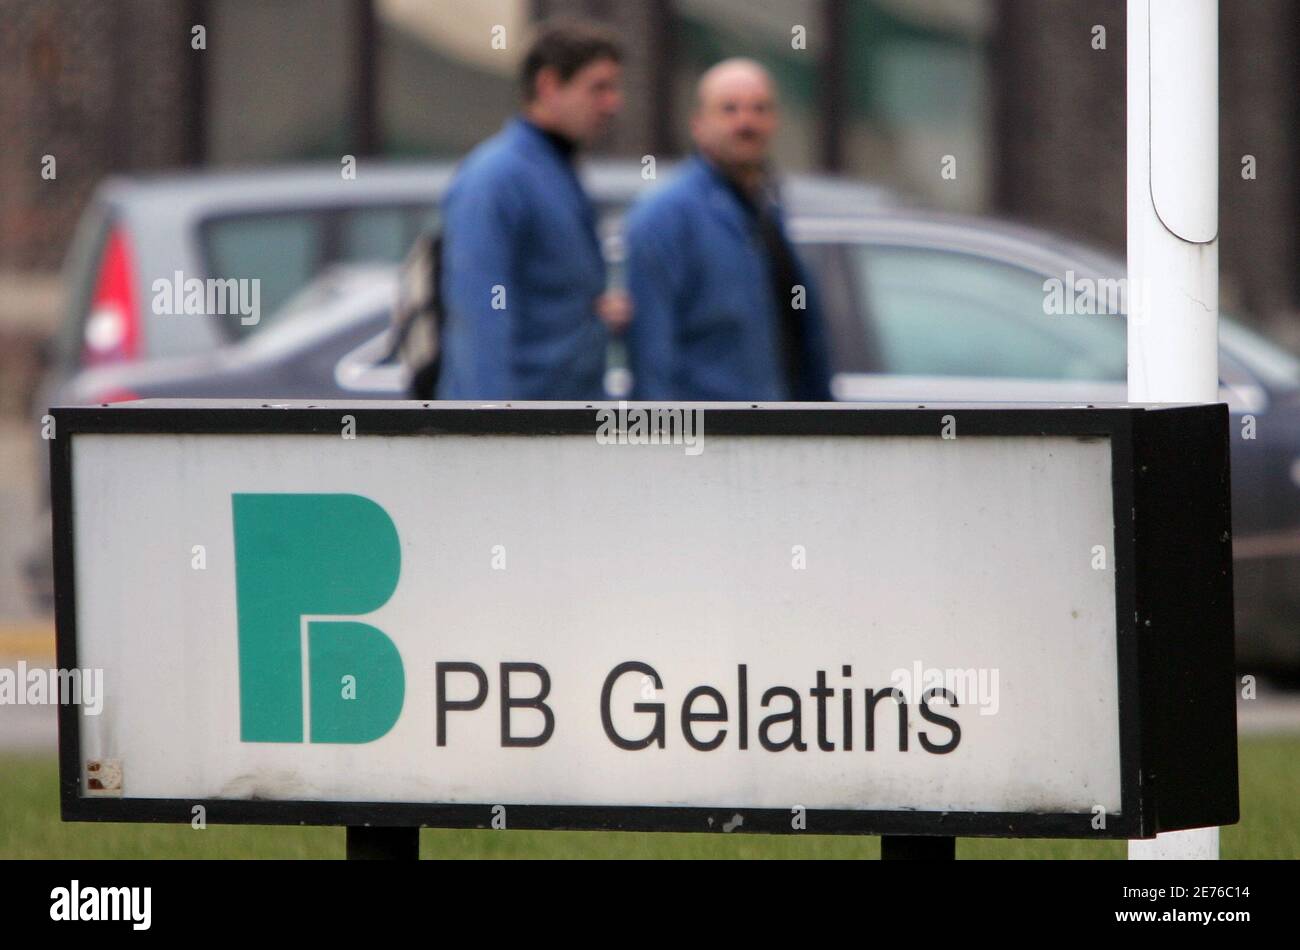 Workers at gelatin producer PB Gelatins walk towards an exit at a plant in  Vilvoorde, near Brussels, January 30, 2006. PB Gelatins is one of the  companies being investigated for dioxin traces